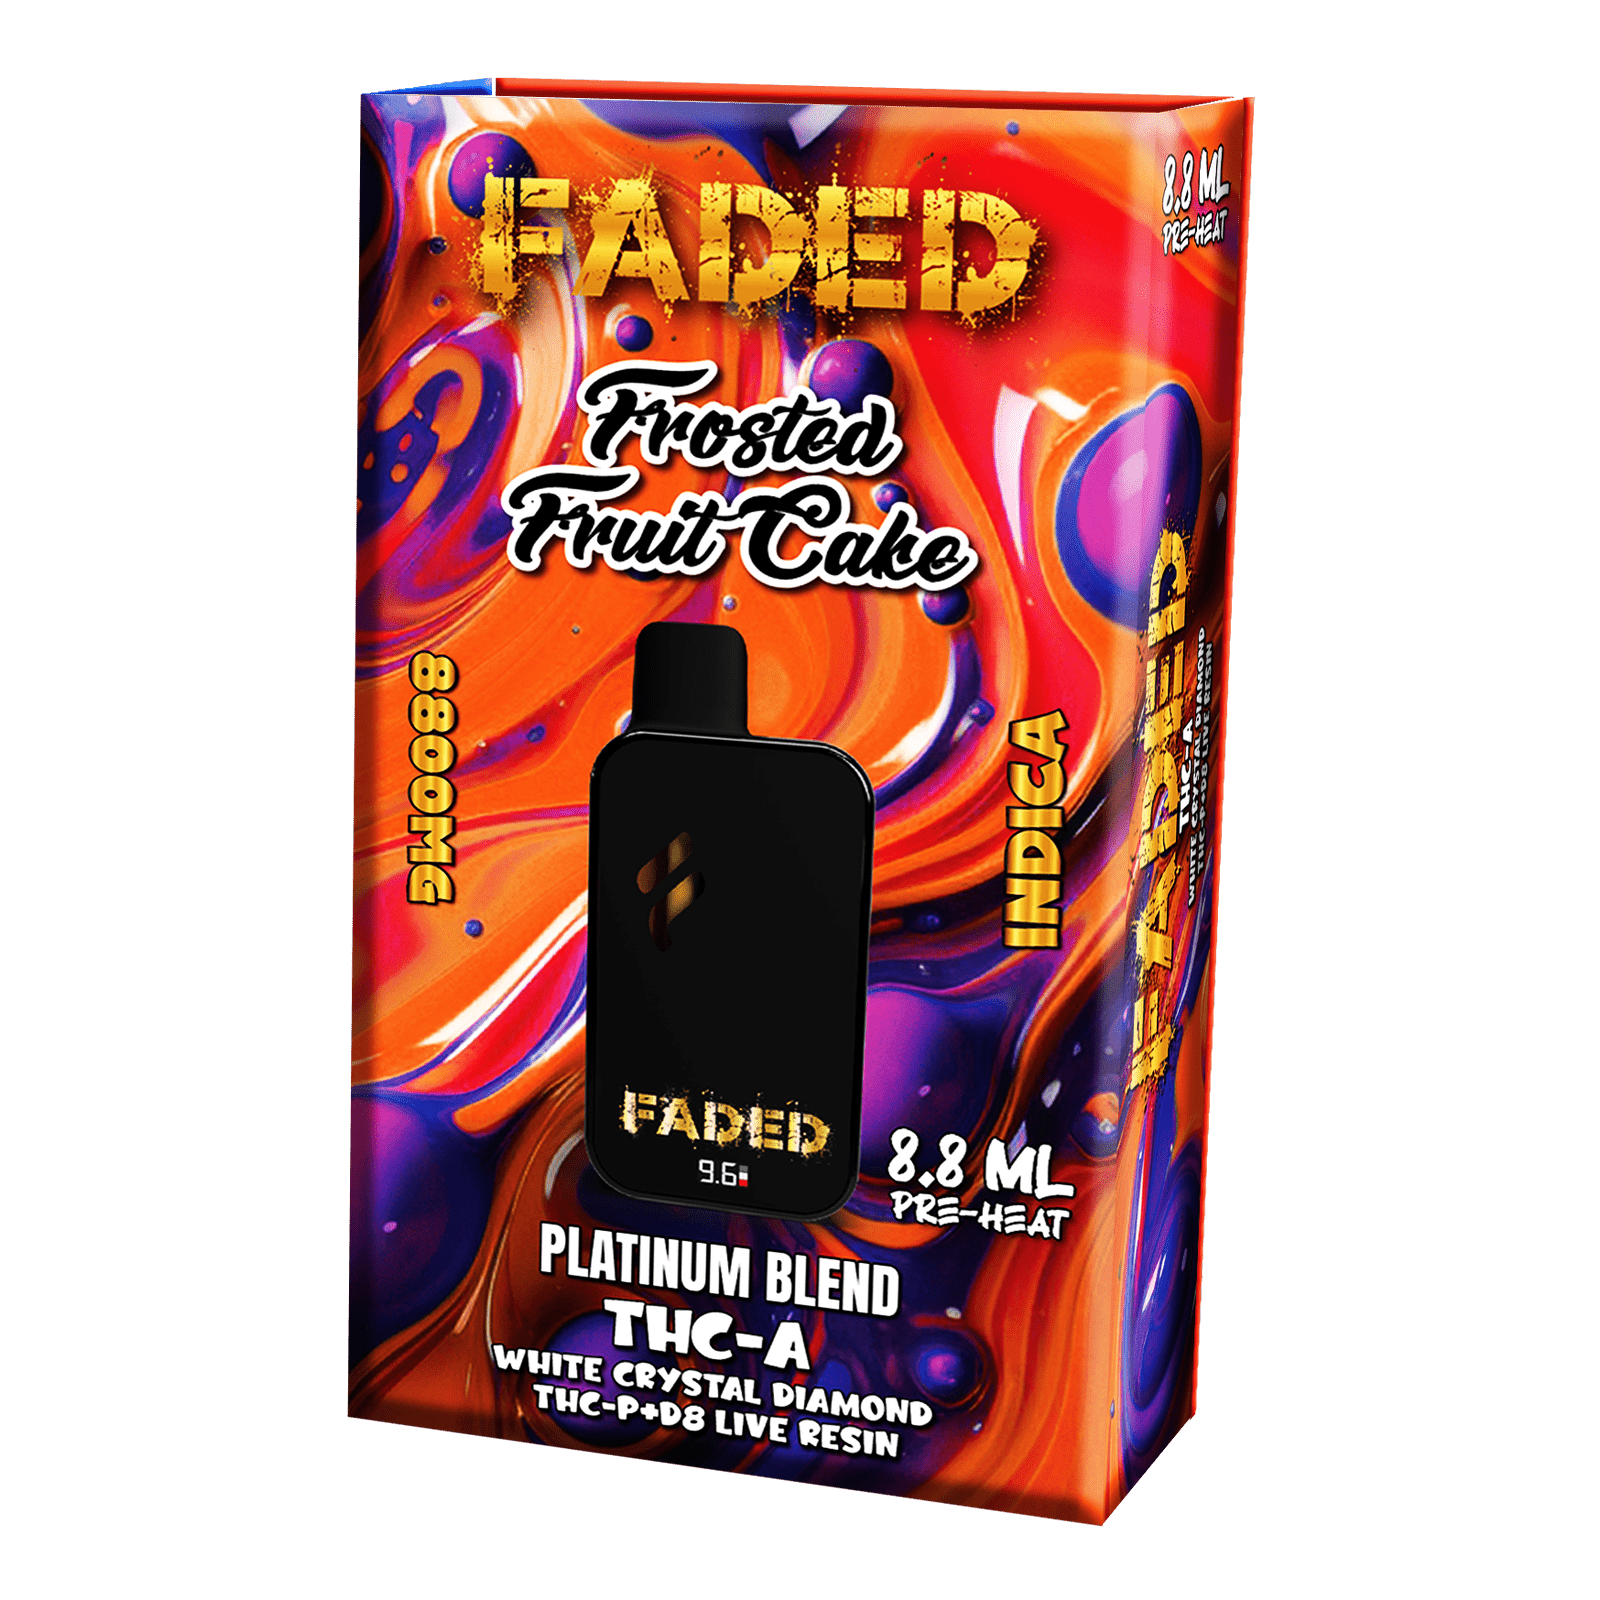 FADED PLATINUM BLEND THC-A 8.8ML DISPOSABLES | FROSTED FRUIT CAKE